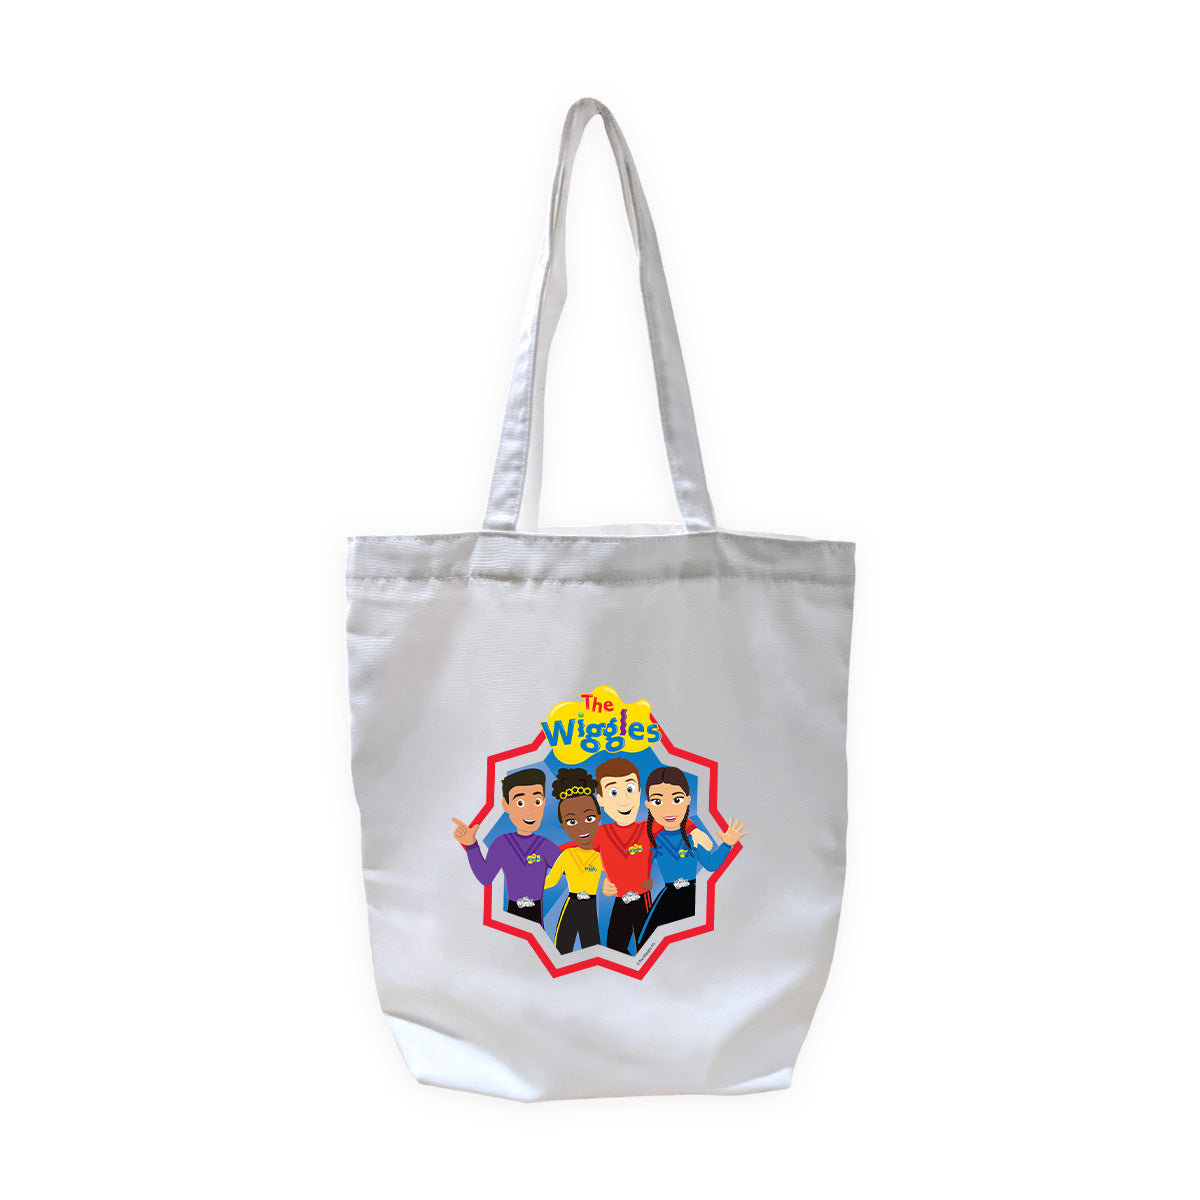 The Wiggles Canvas Tote Bag V2